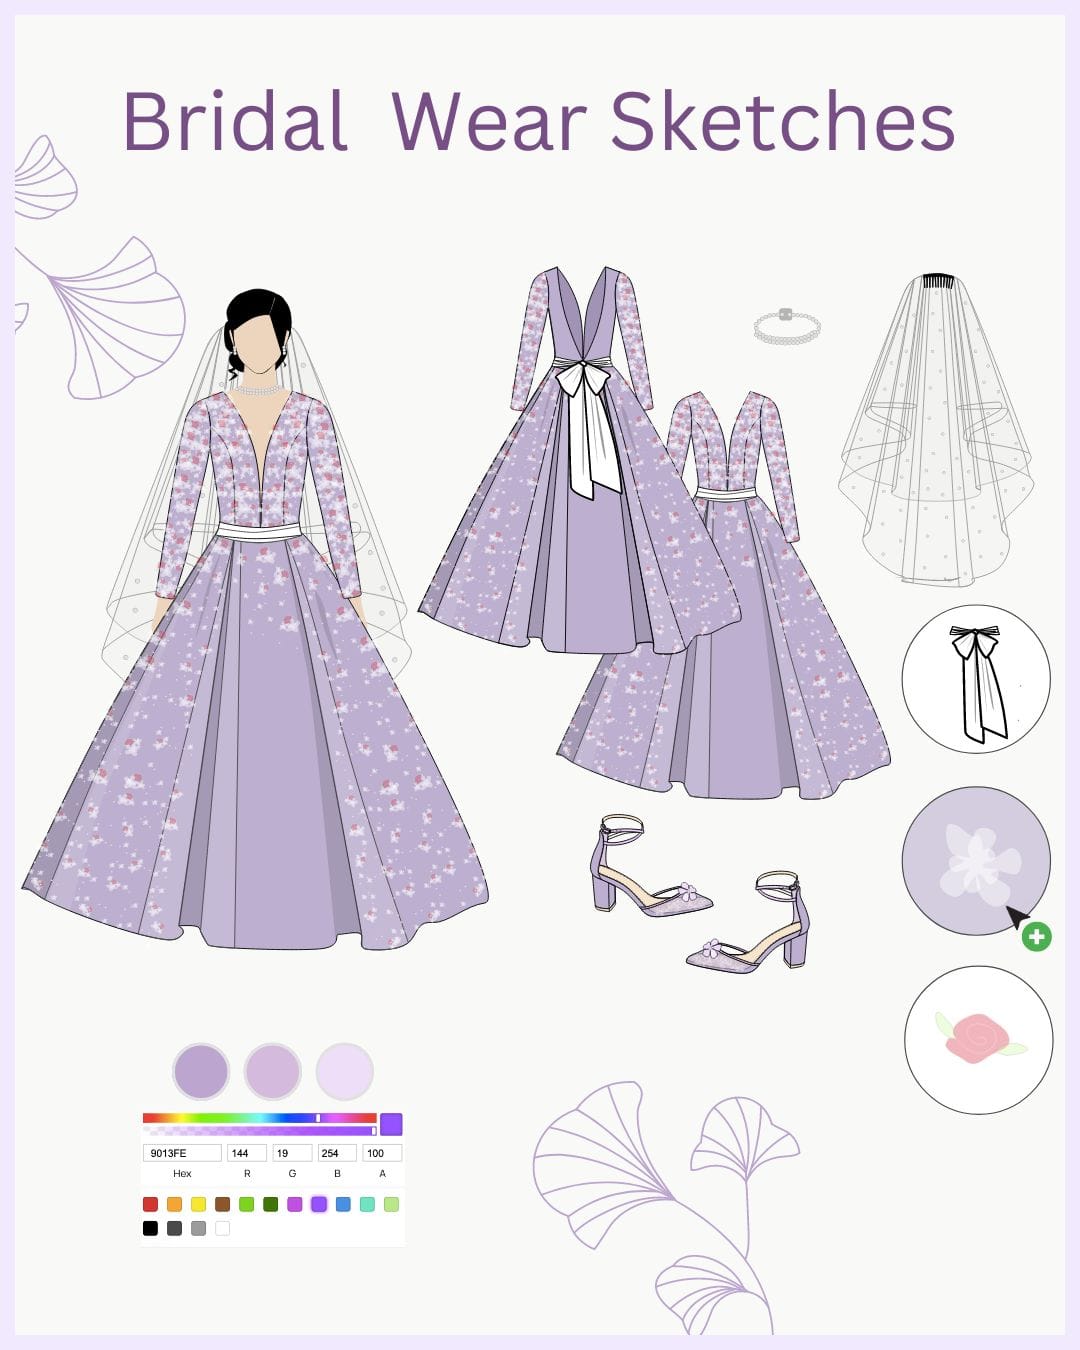 Top 10 Bridal Wear Sketches and Templates